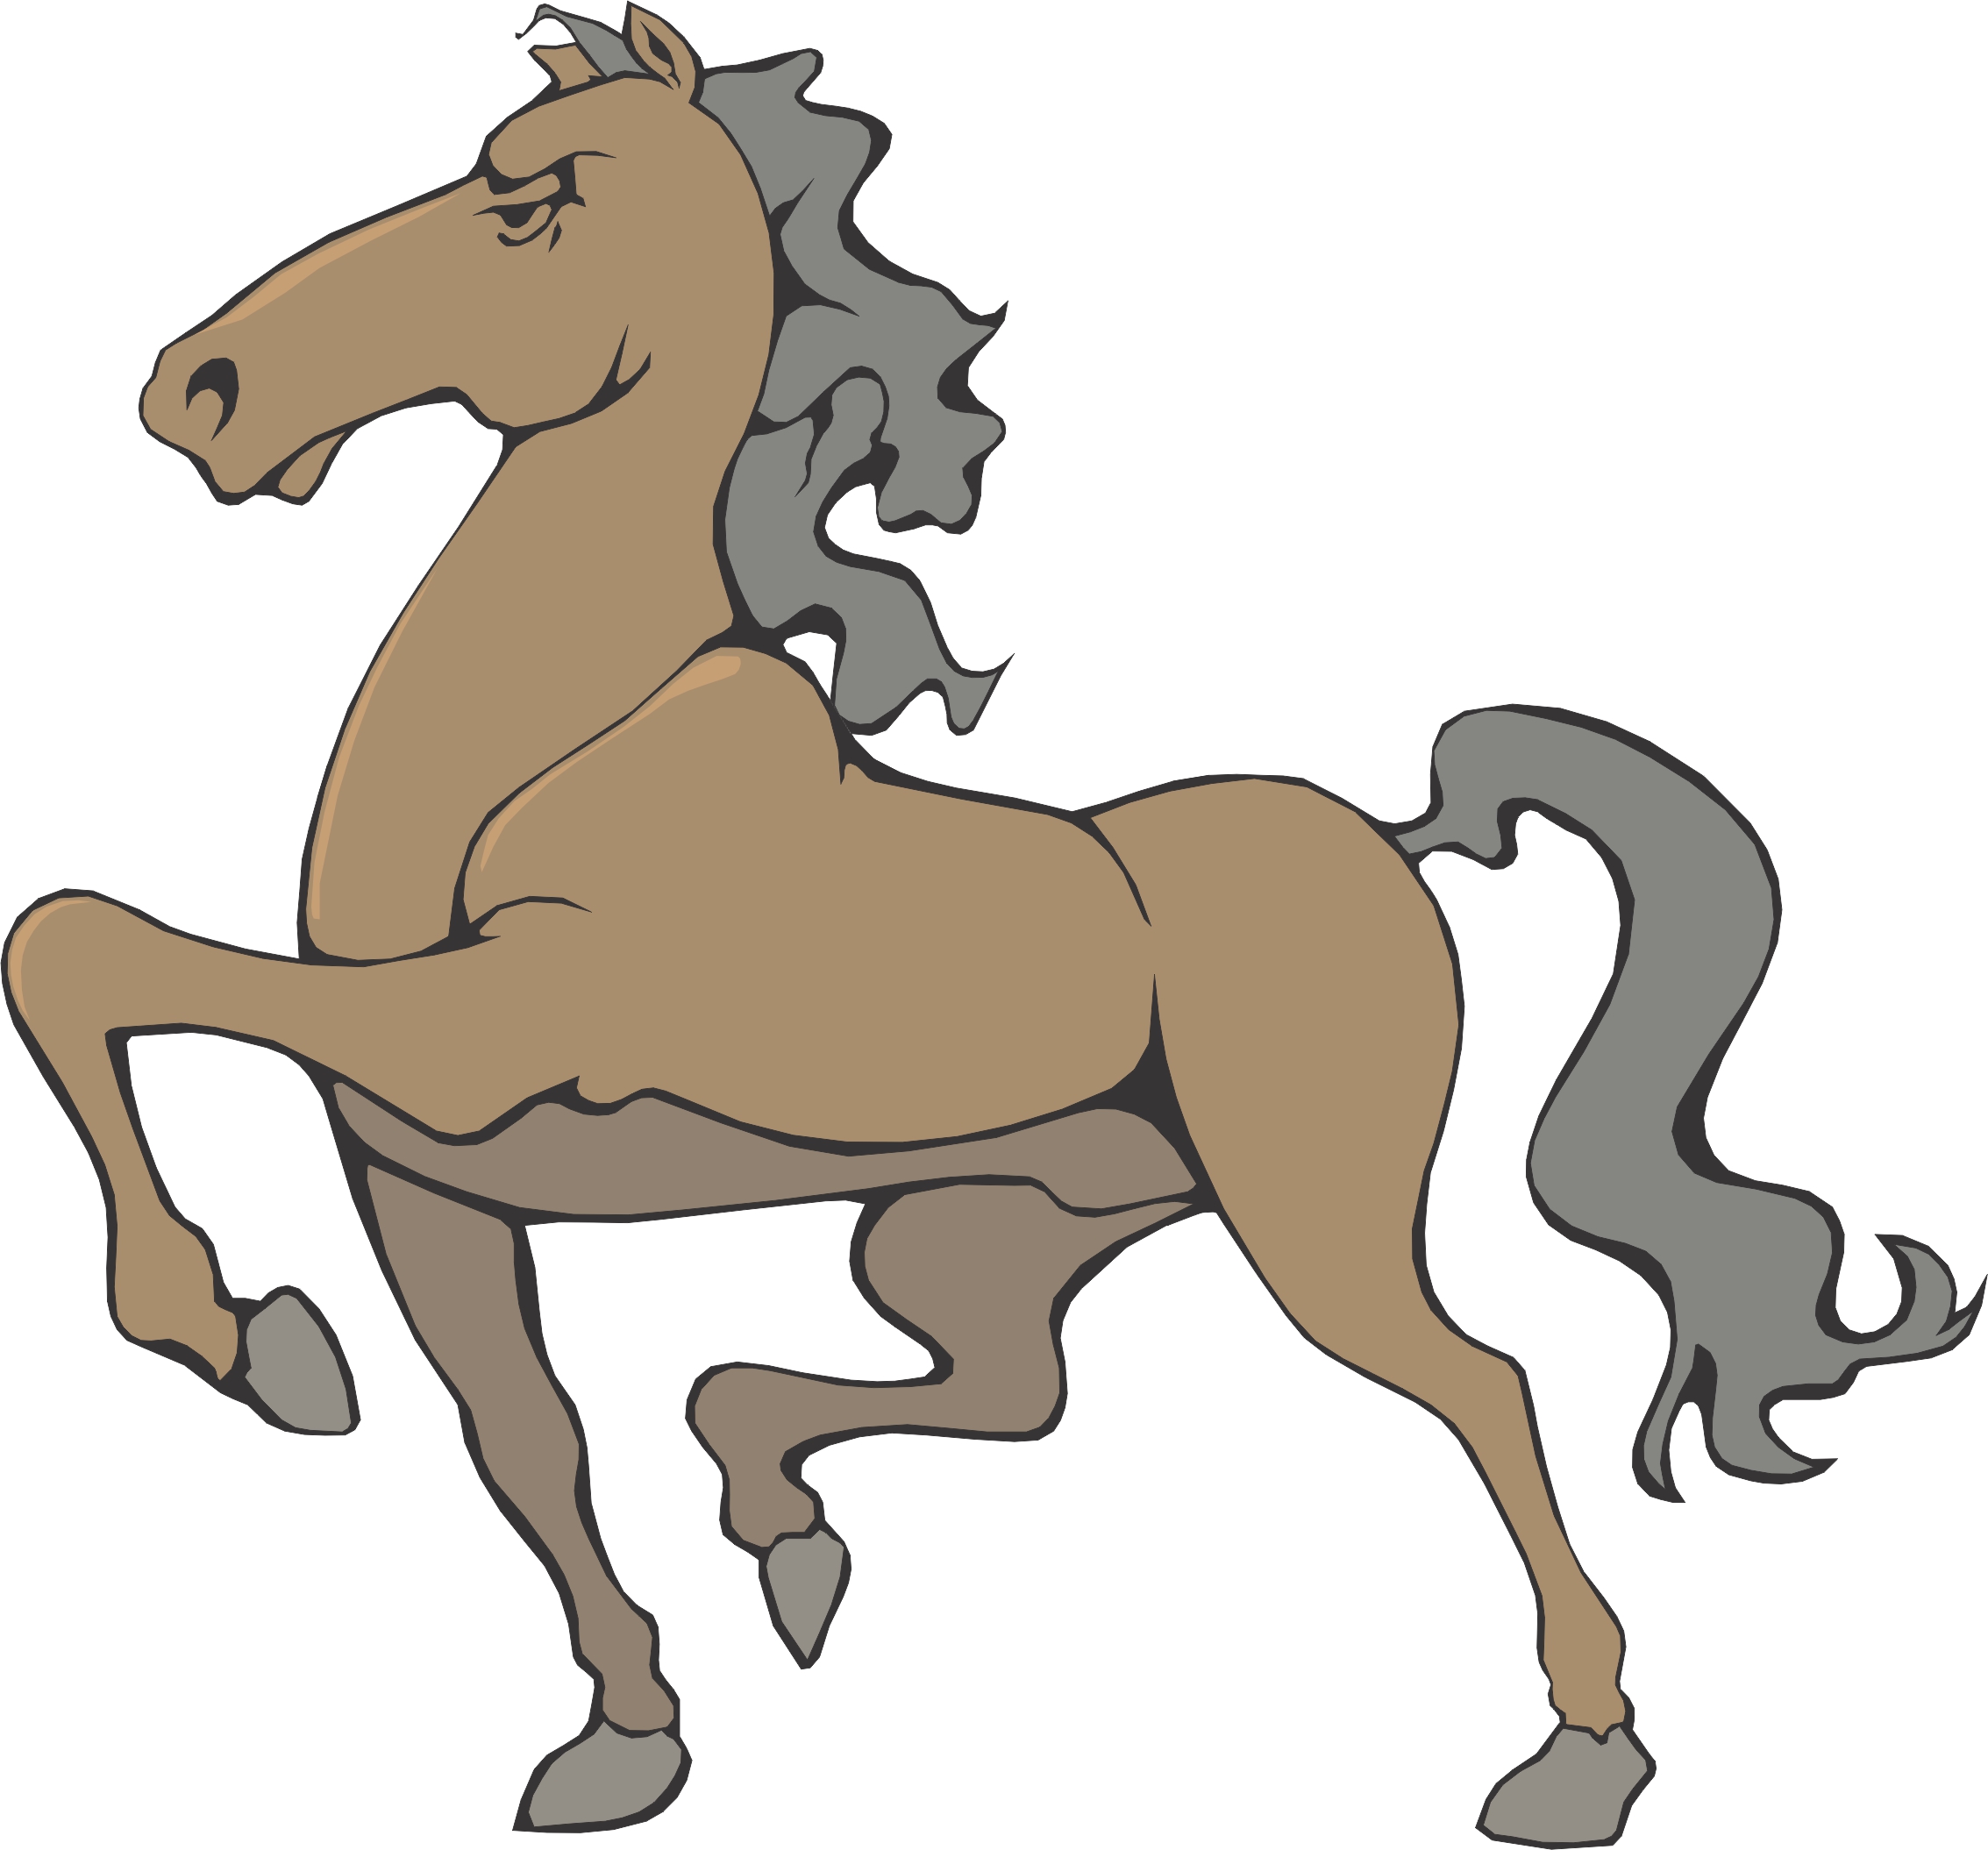 Free Cartoon Horse, Download Free Cartoon Horse png images, Free